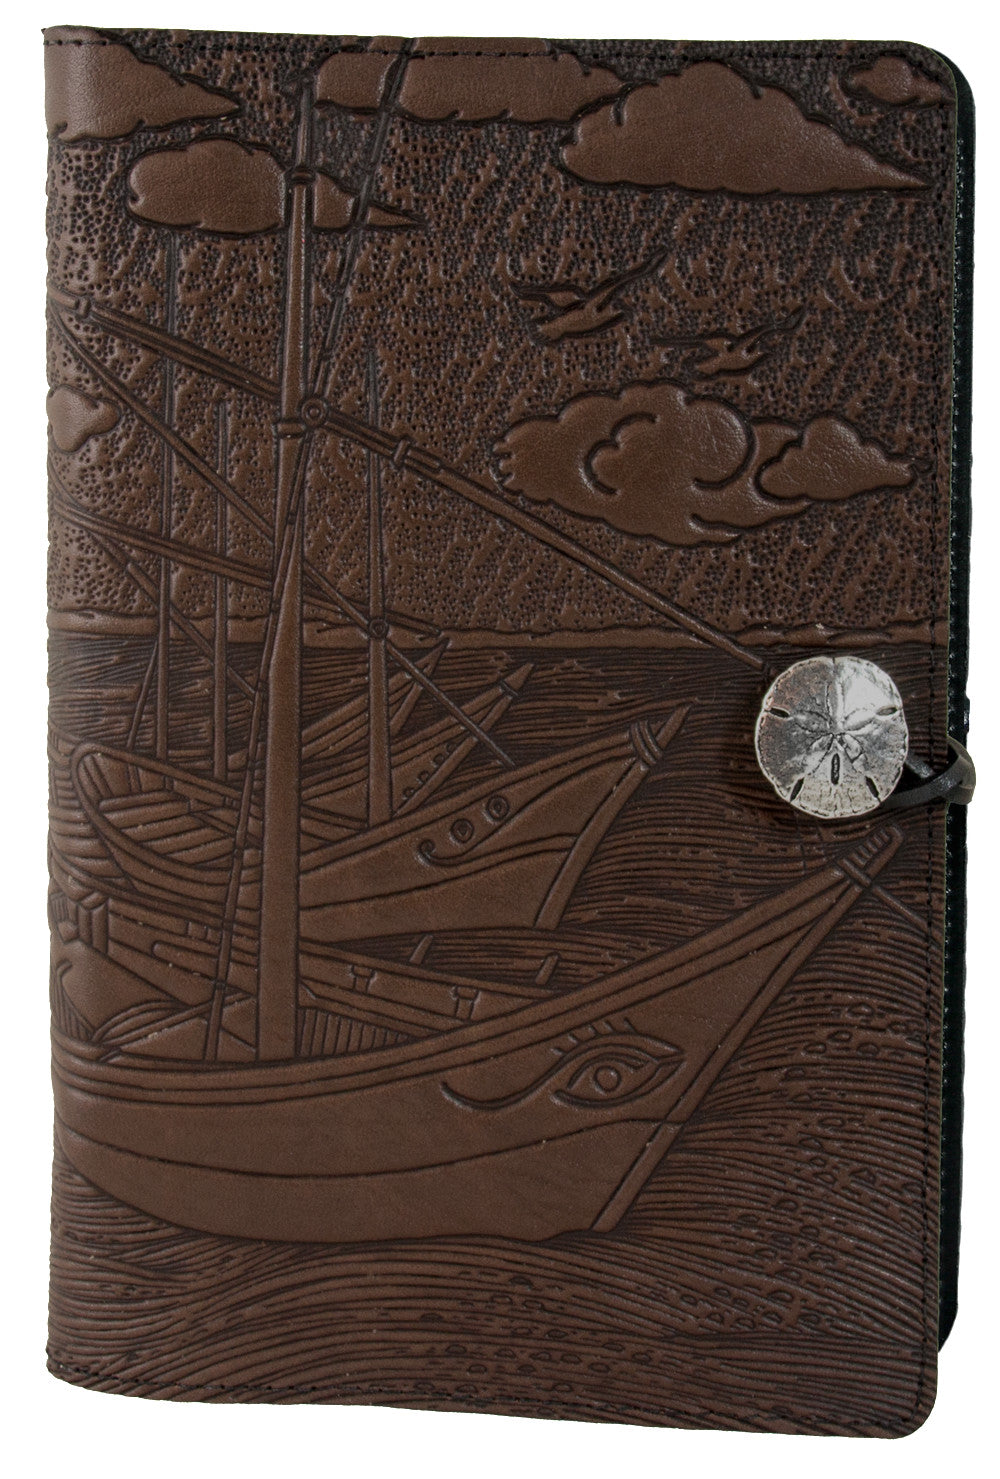 Small Leather Journal - Van Gogh Boats in Chocolate